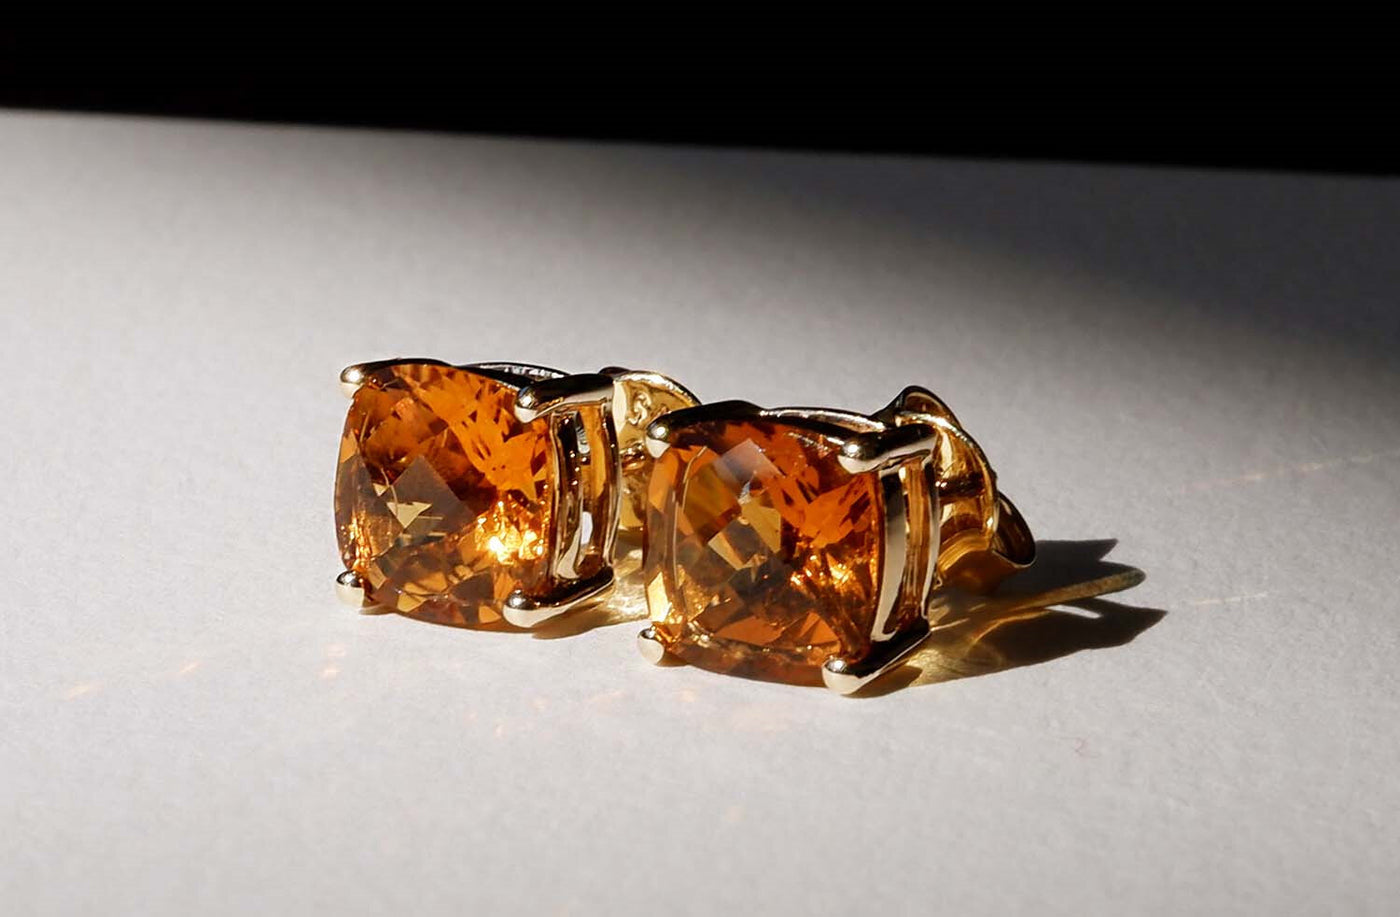 Chequerboard Madeira Citrine Stud Earrings in Yellow Gold | 3.92ctw